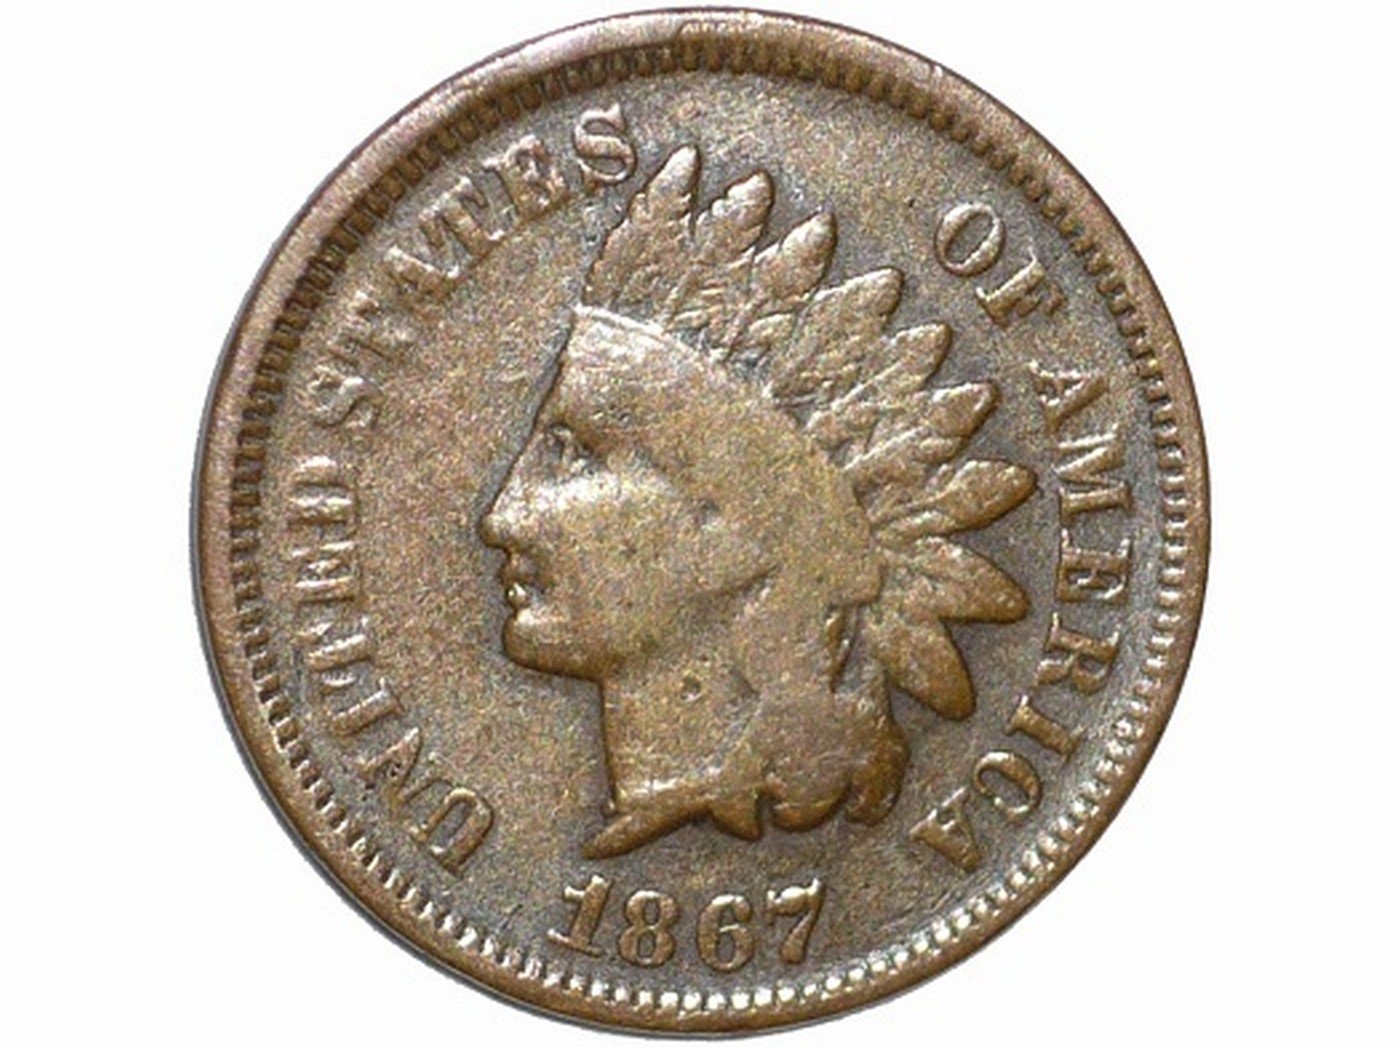 1867 RPD-003 - Indian Head Penny - Photo by David Poliquin